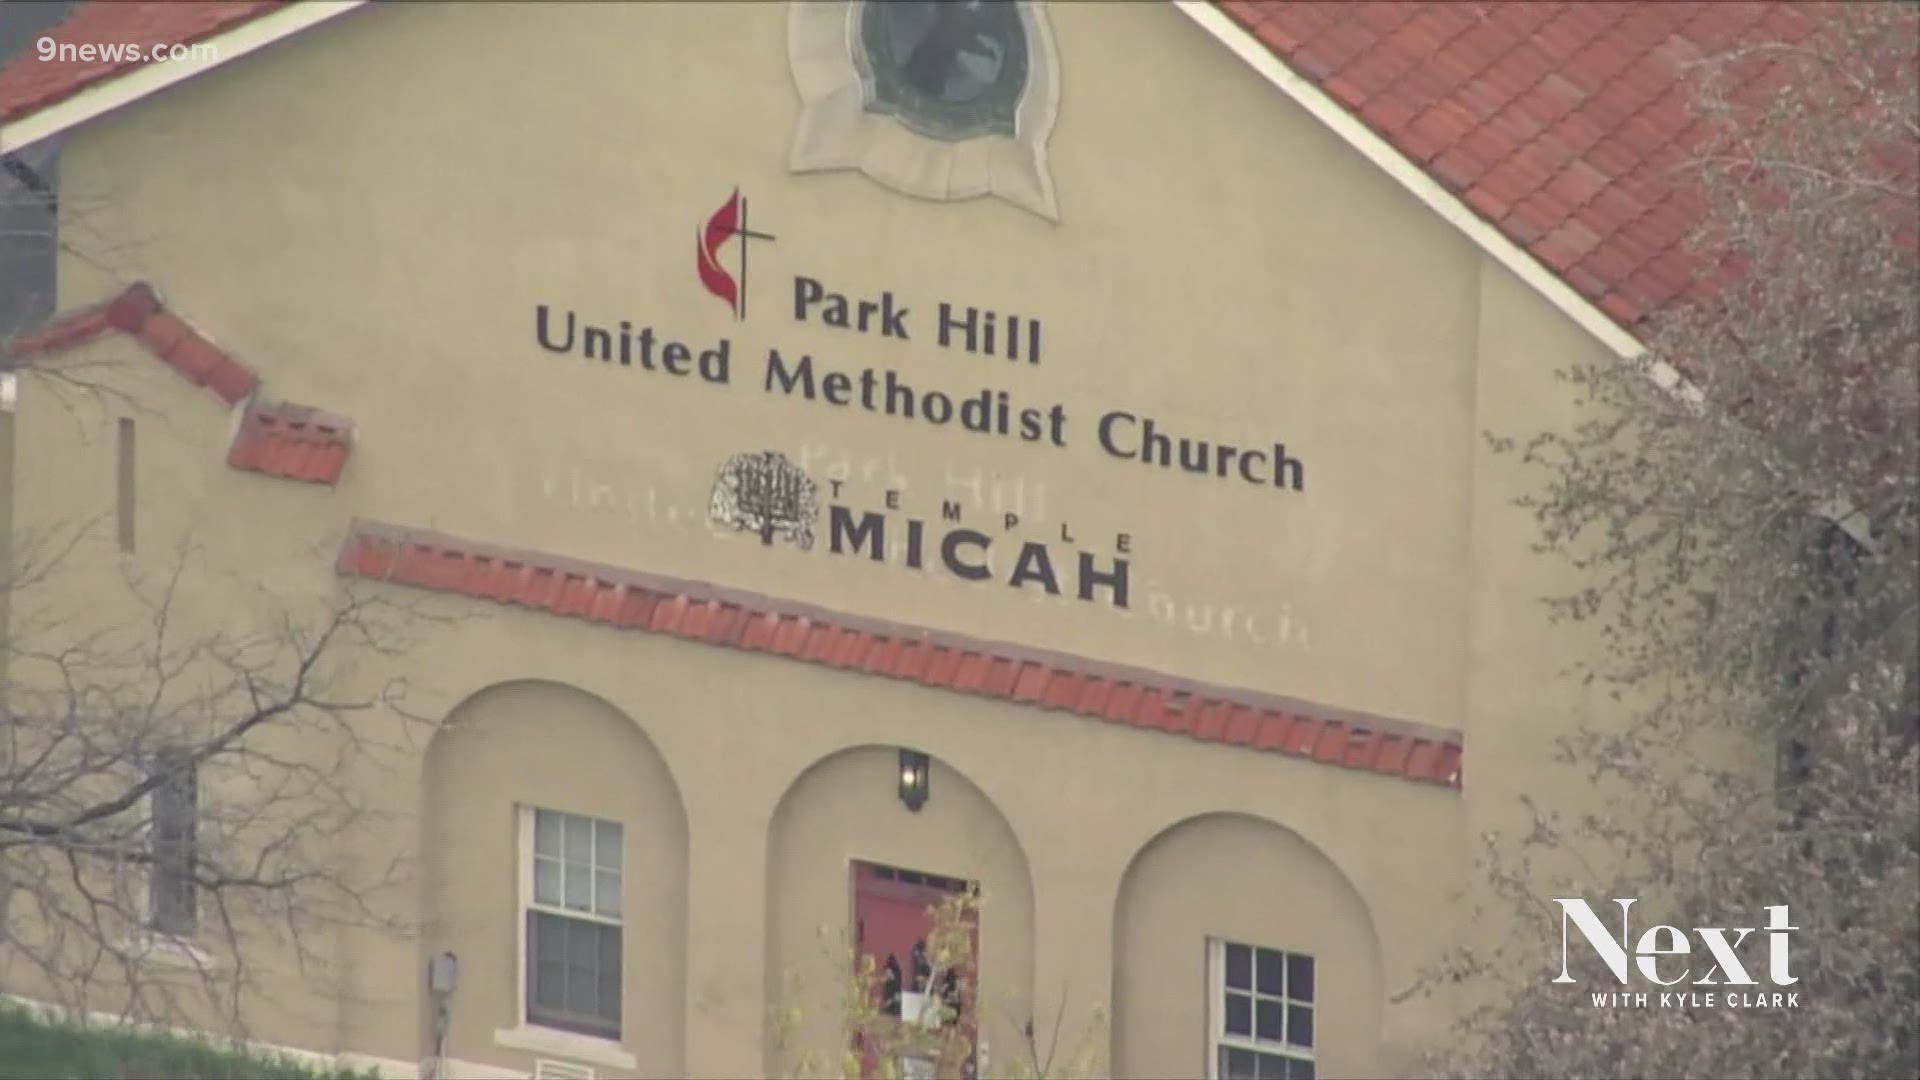 A lawsuit claims the defendants "acted with an objective to accomplish a nuisance” by agreeing to bring the campsite to Park Hill United Methodist.